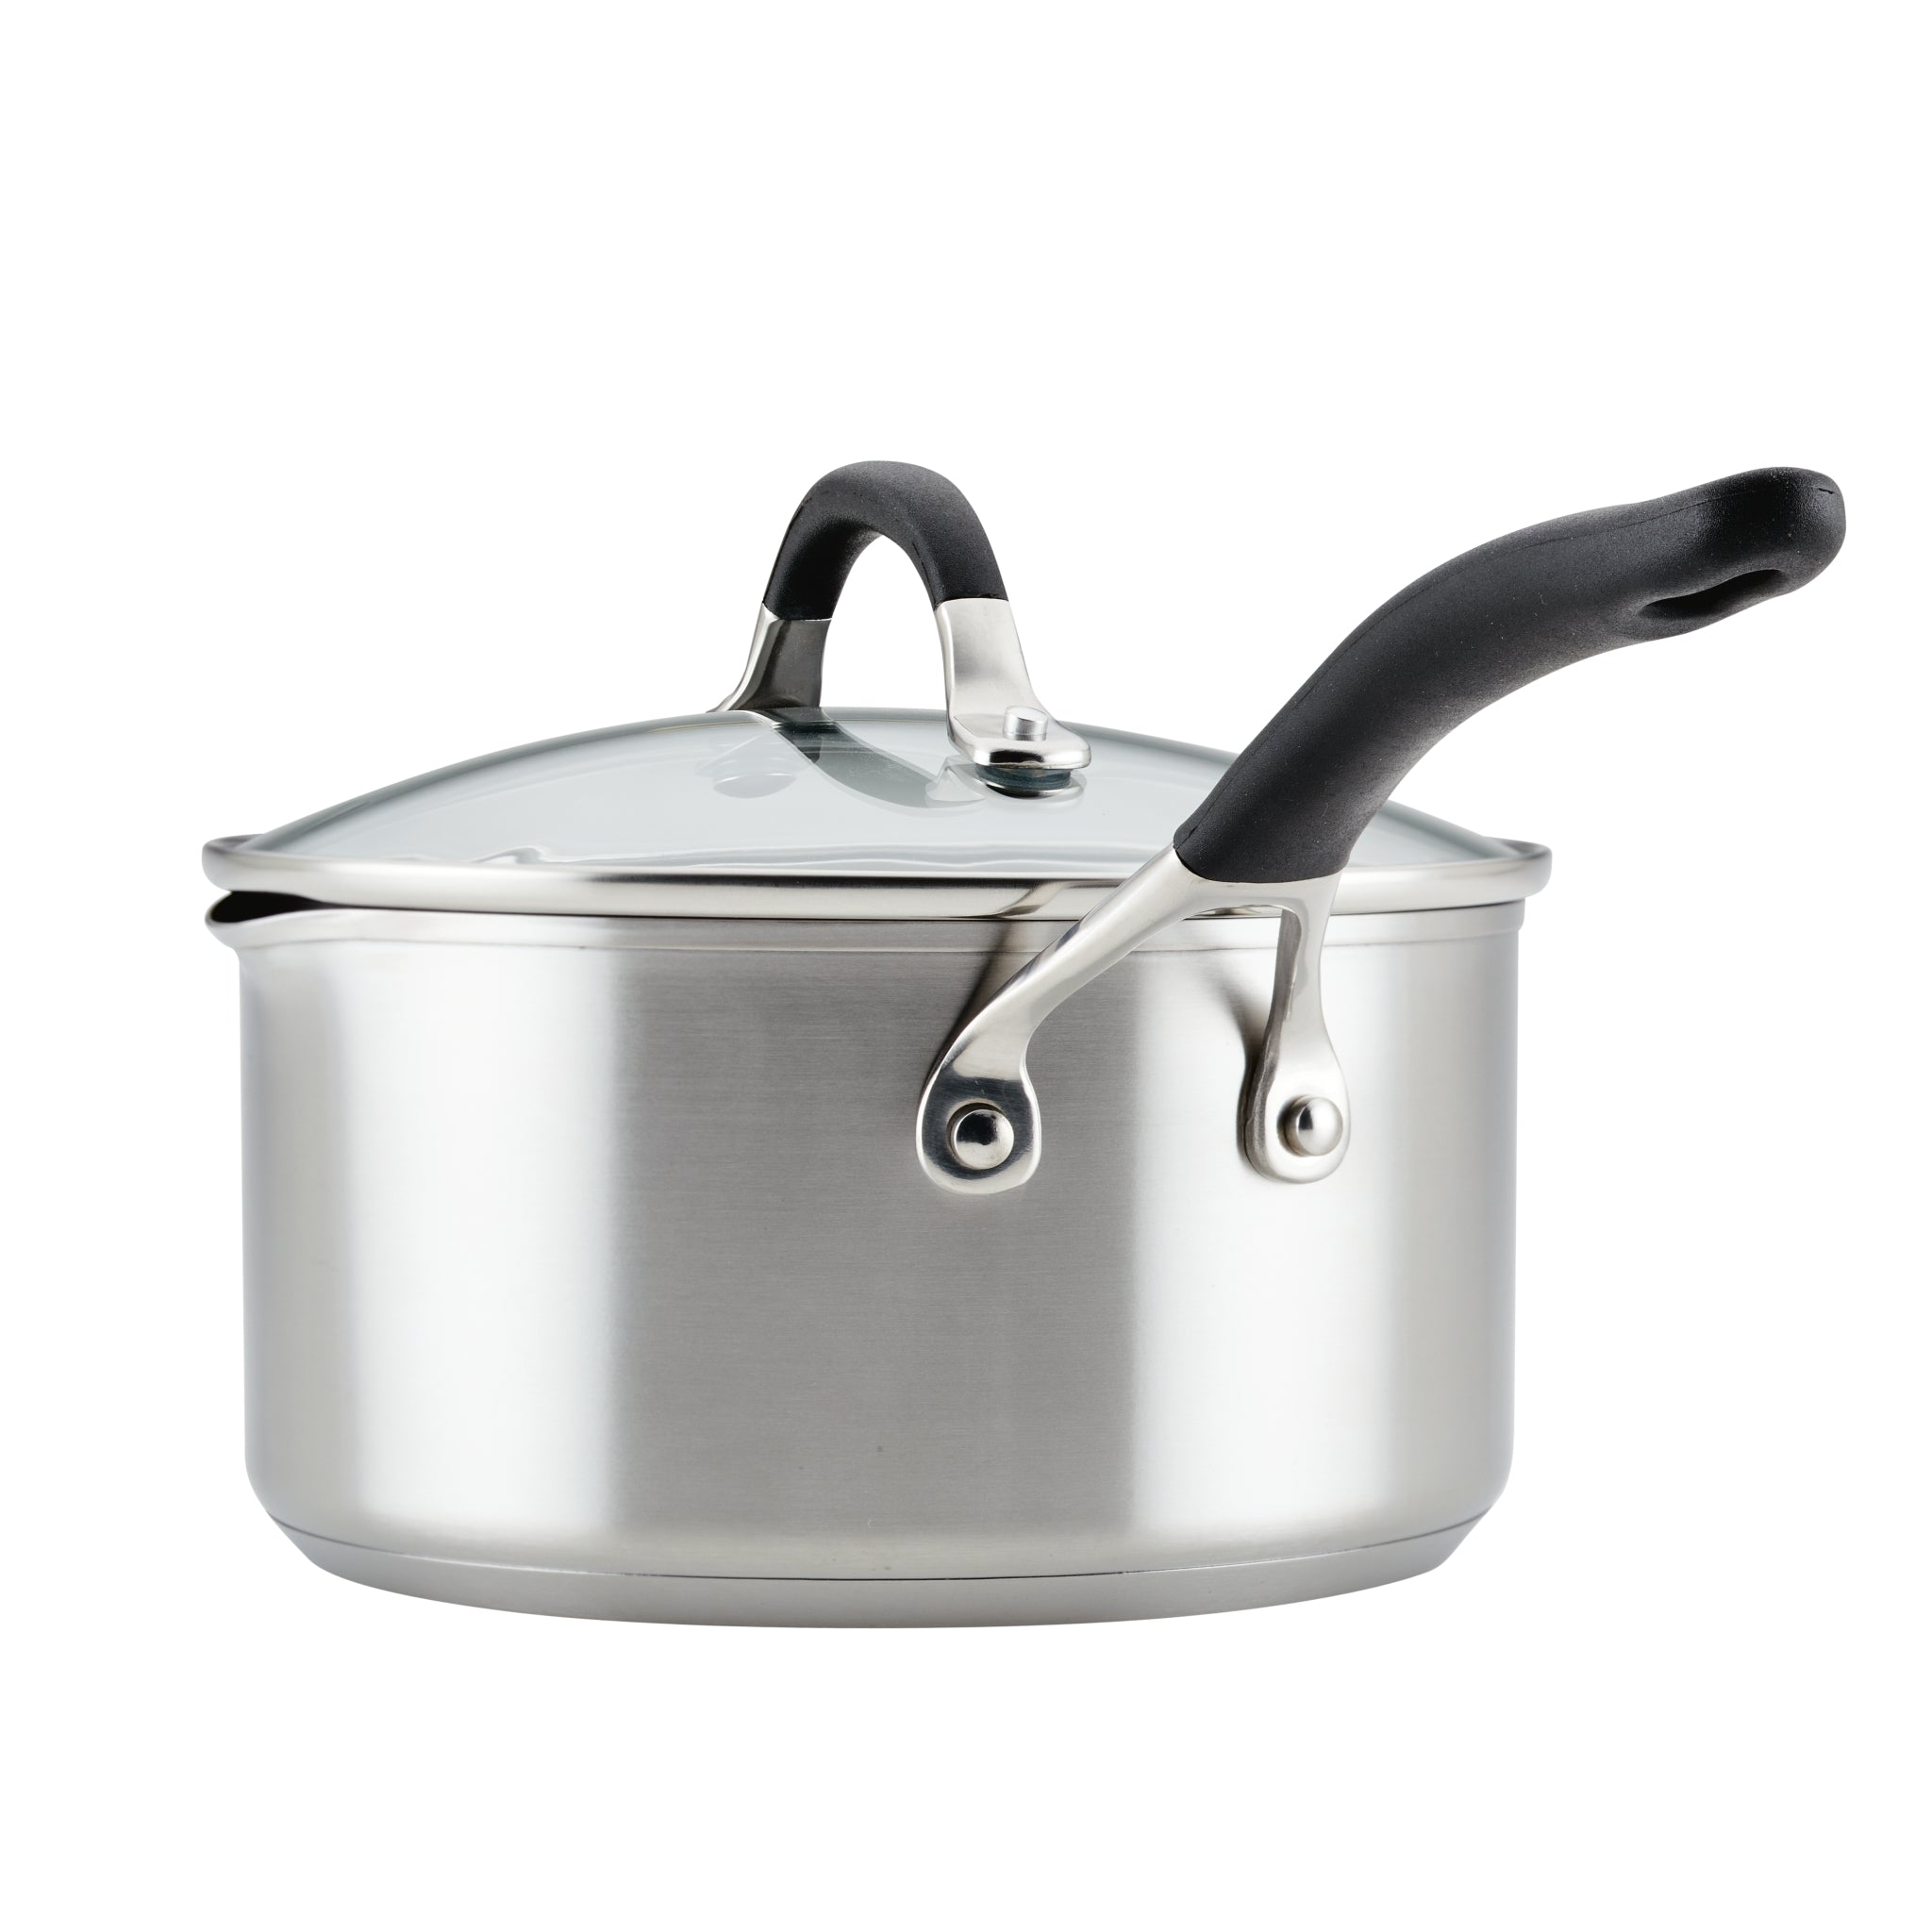 Circulon Cookware 3 Quart Covered Straining Saucepan with Pour Spouts in  Oyster Gray, NFM